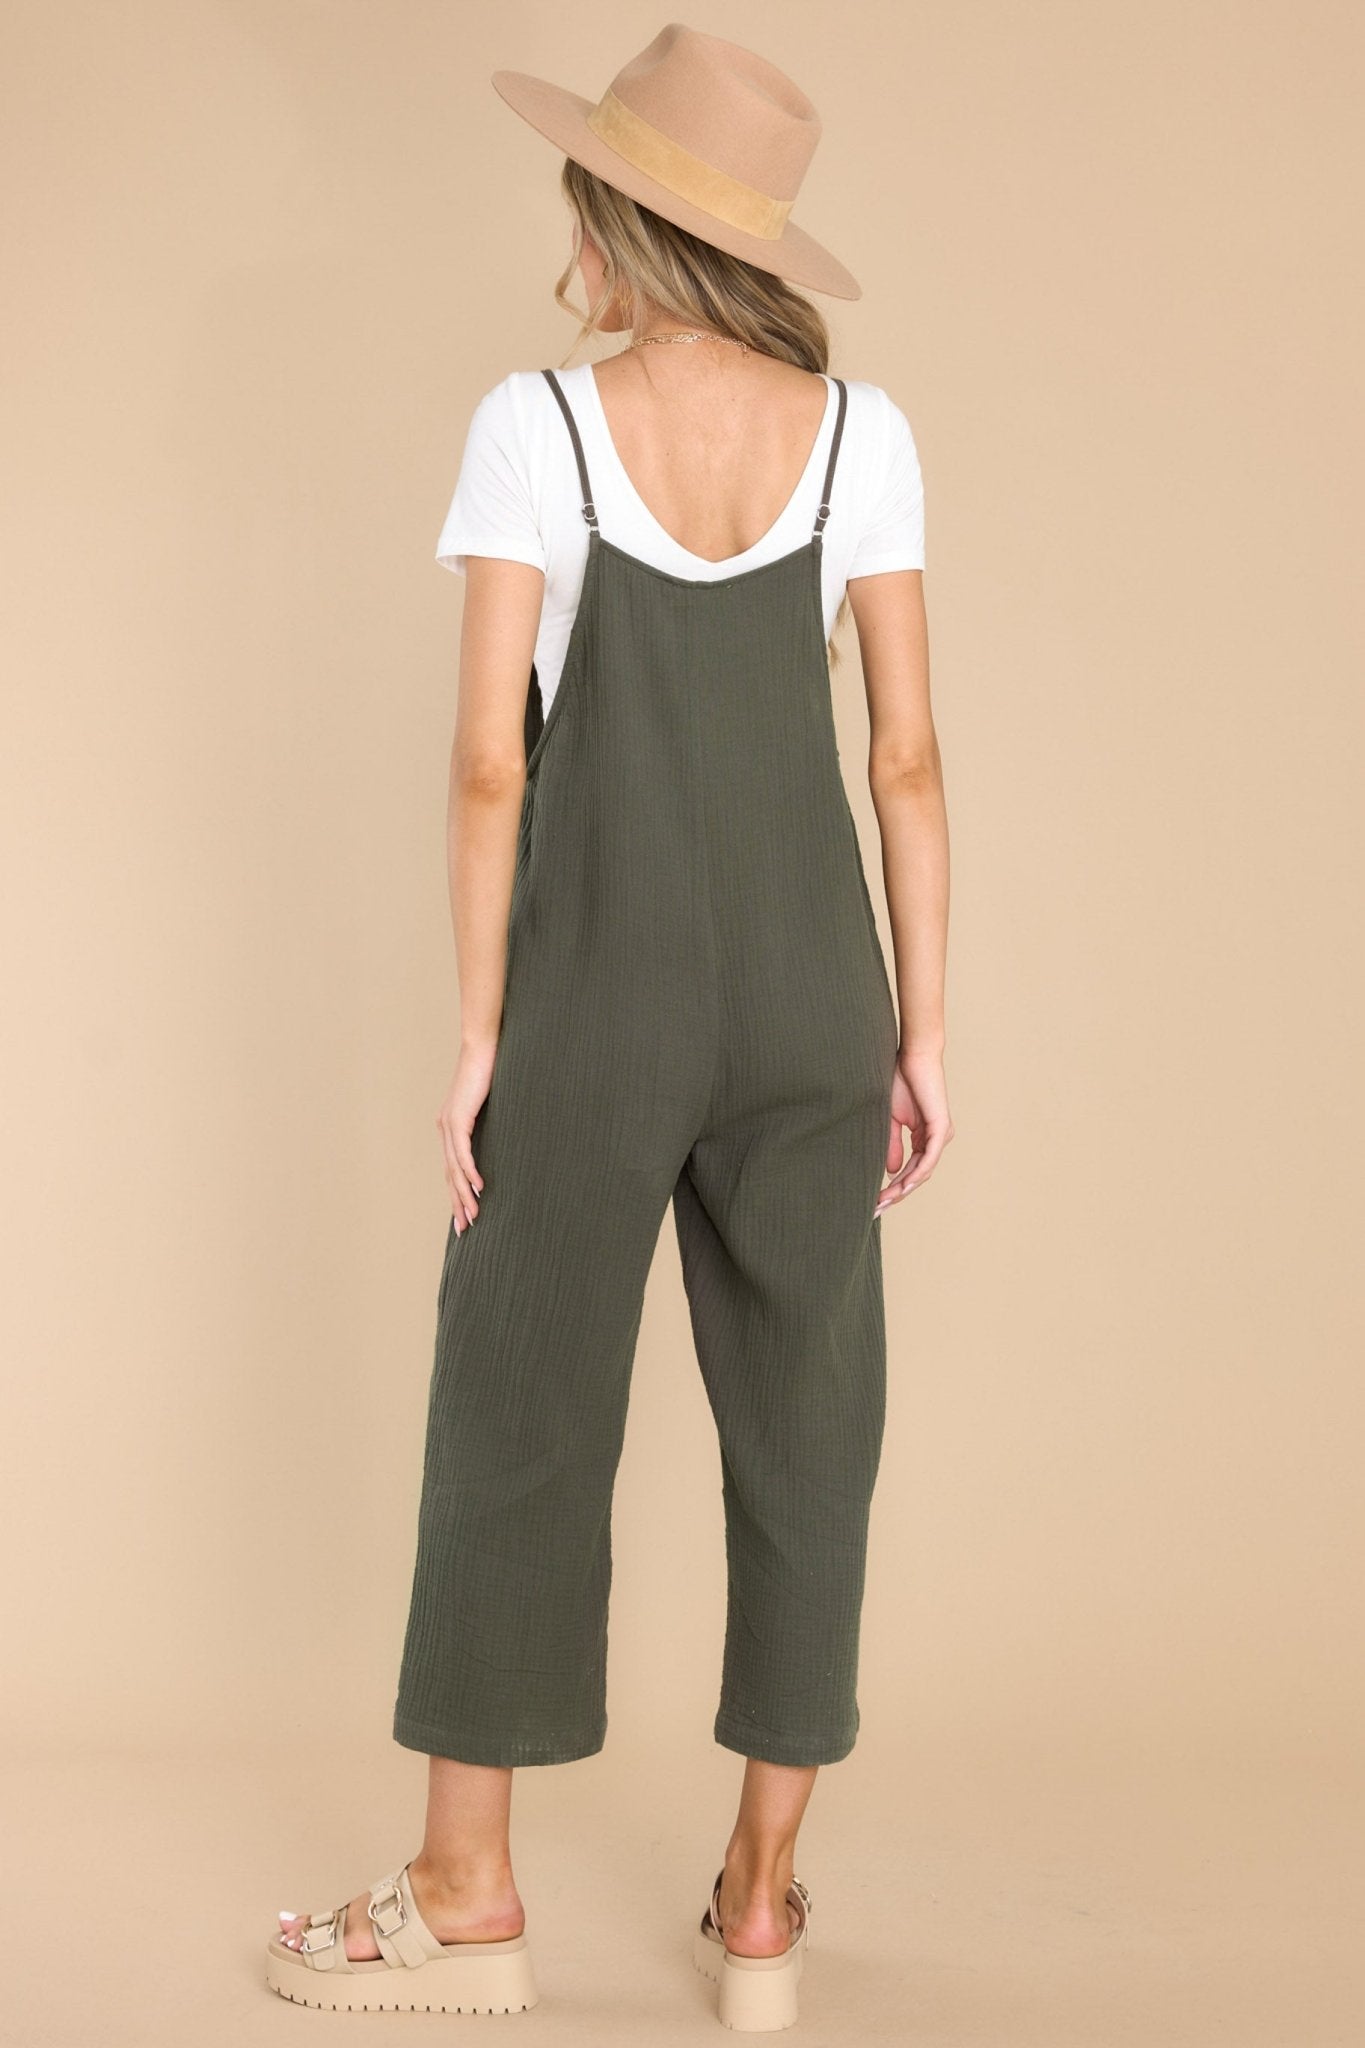 Overly Dramatic Olive Cotton Overalls - Red Dress